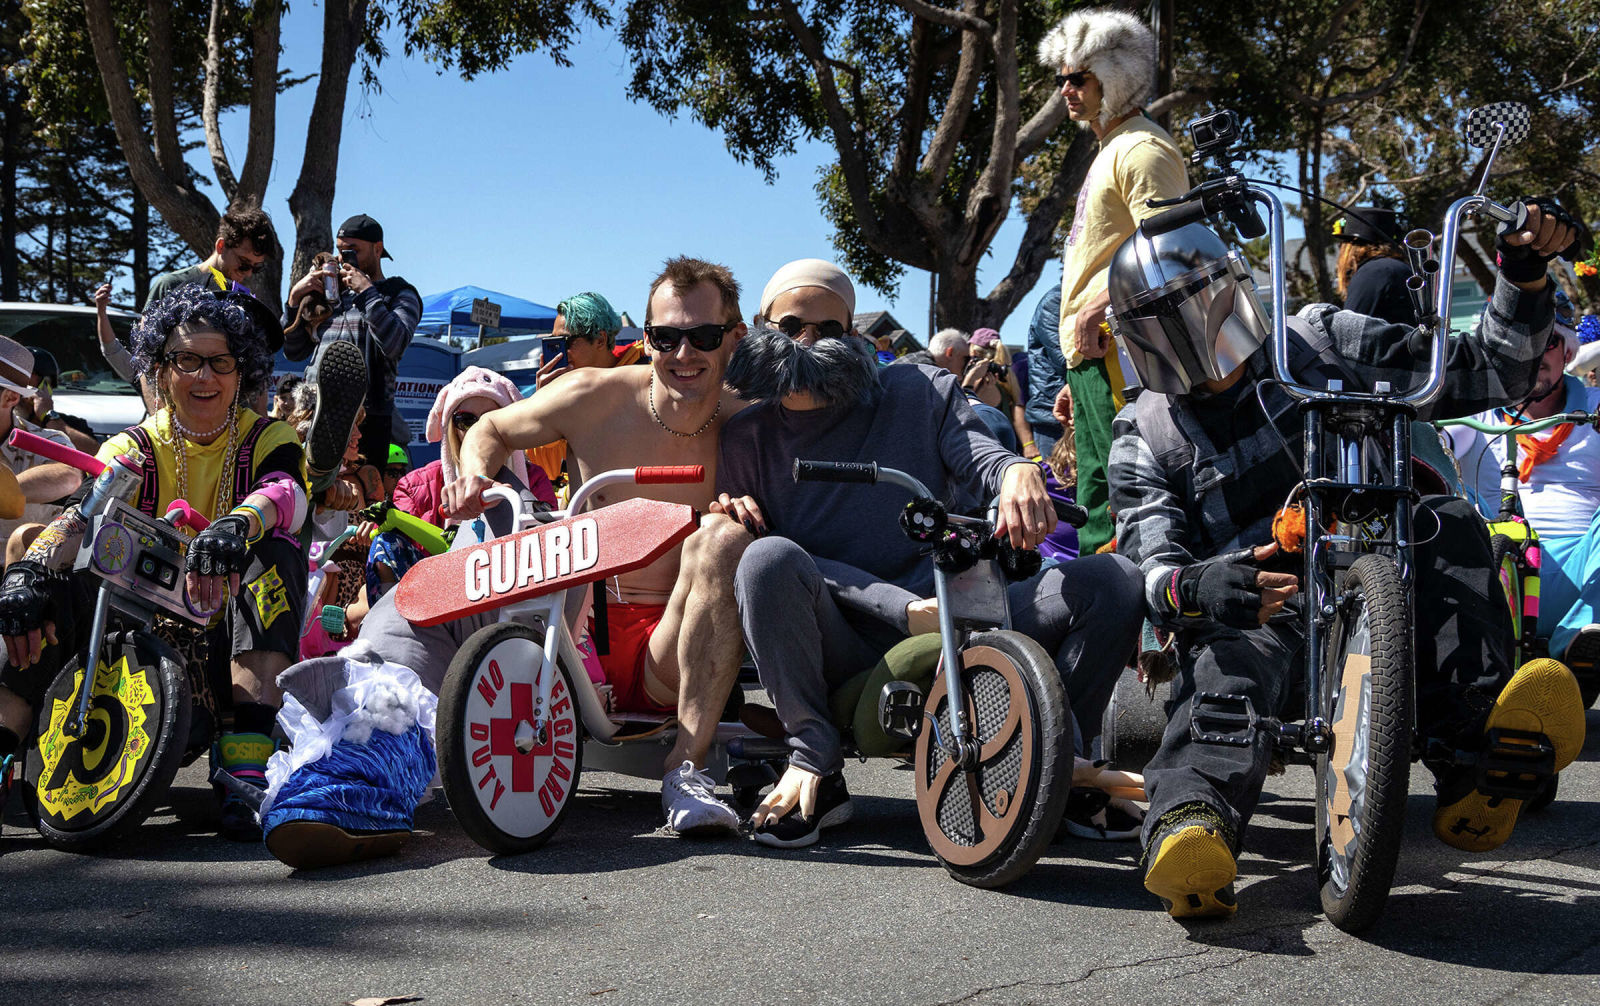 people in makeshift &quot;big wheel&quot; vehicles prepare to bomb down a hill